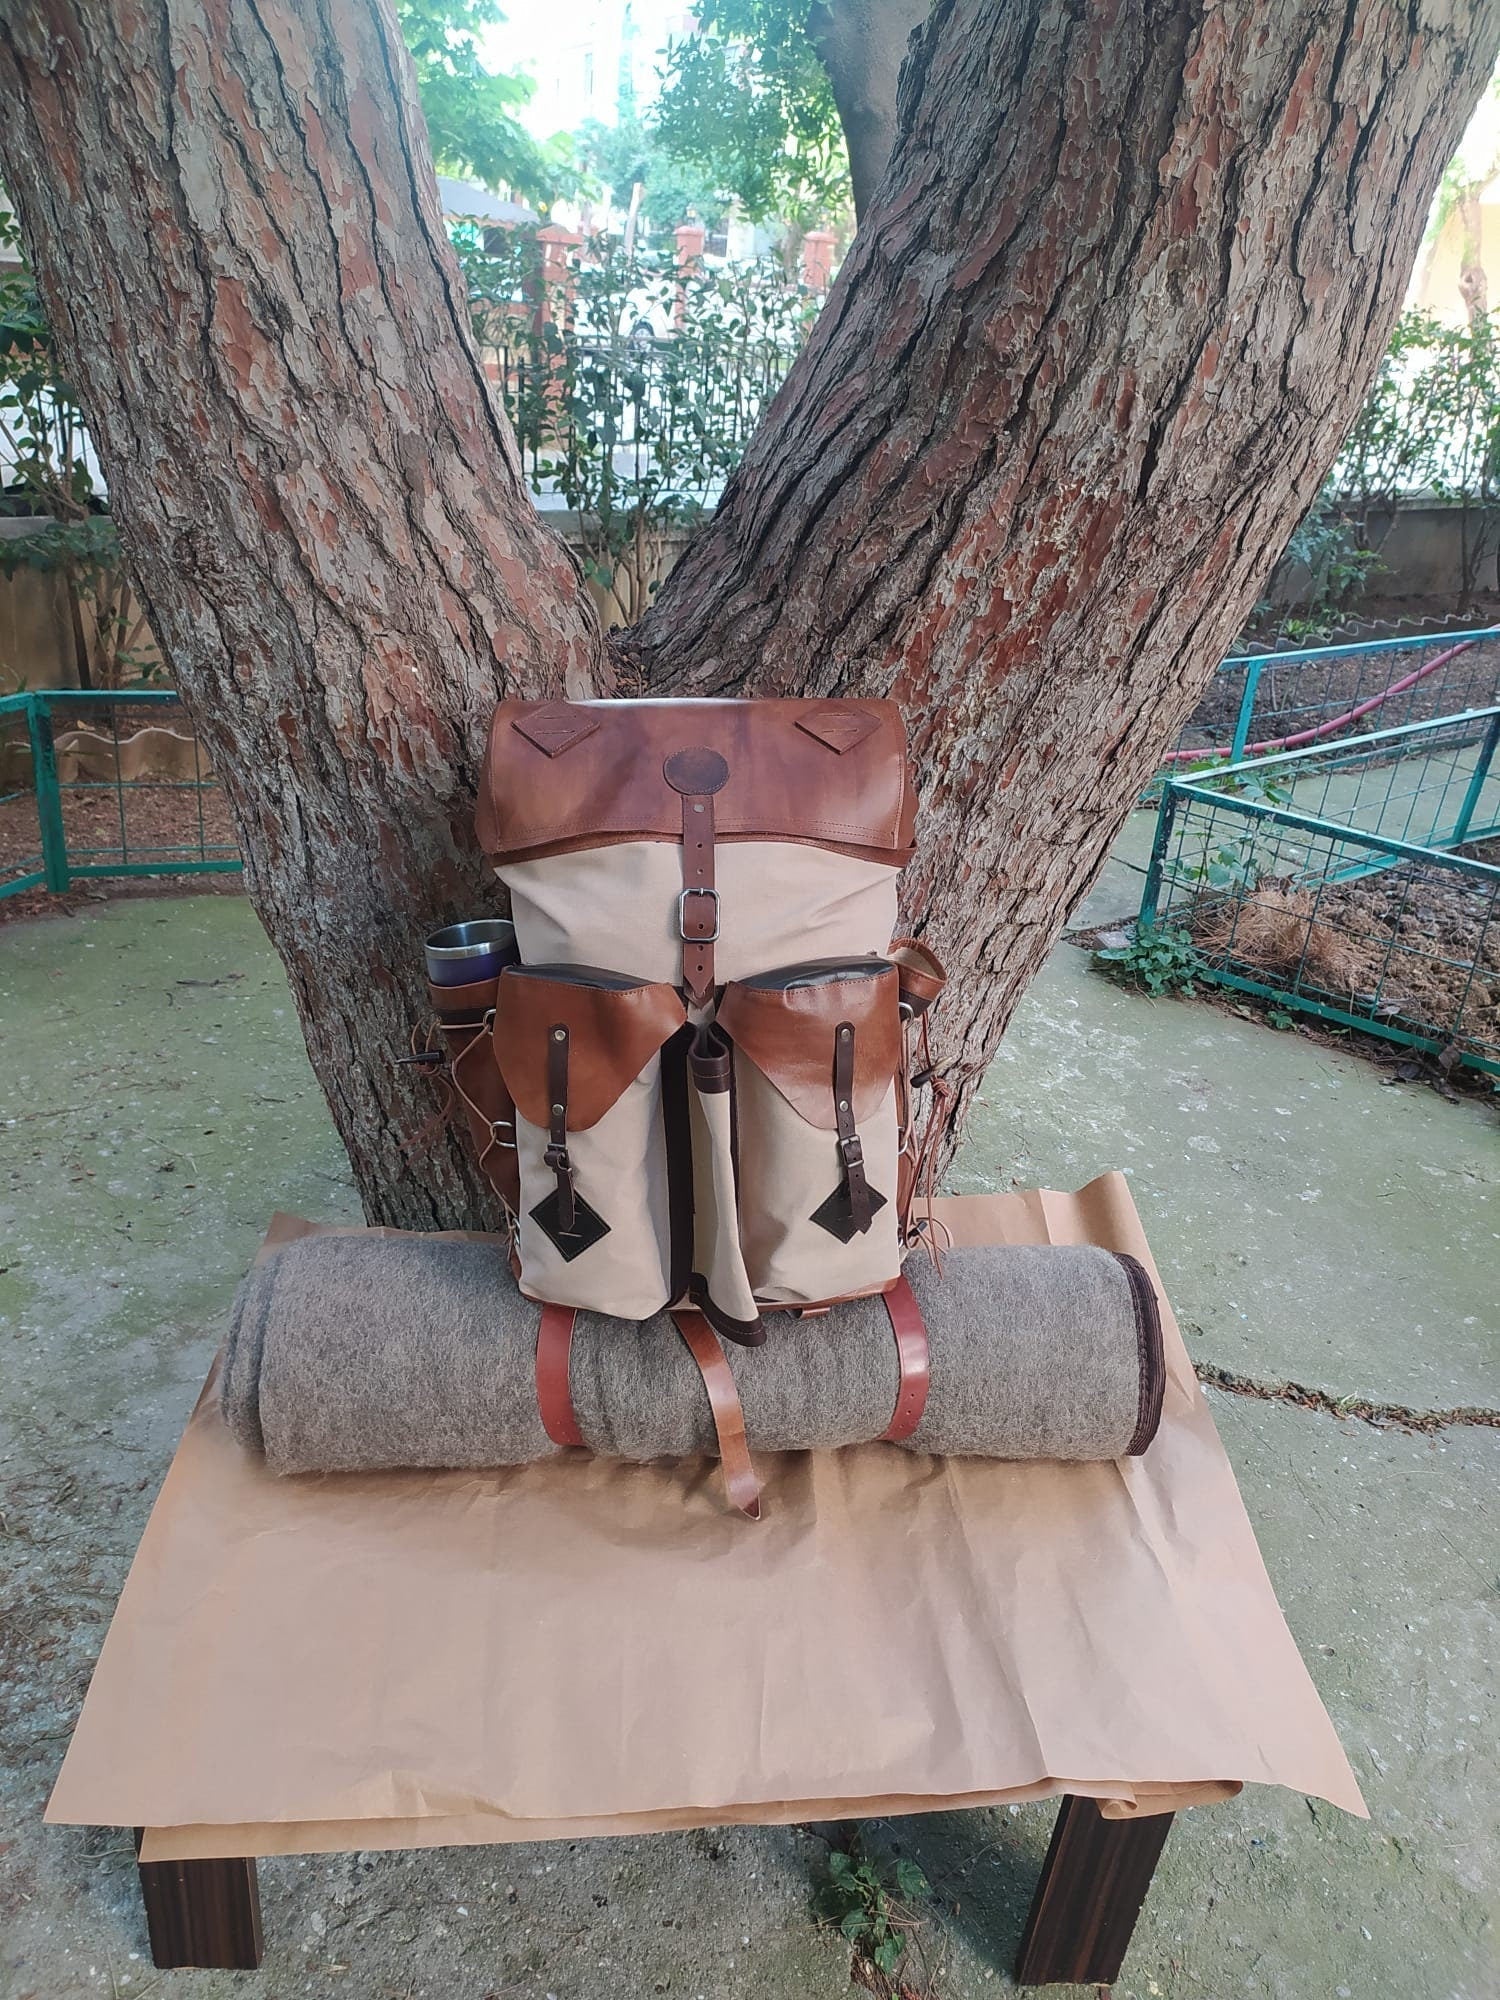 200 USD Discount | Bushcraft Design Awards | Handmade Leather and Waxed Backpack for Travel, Camping, Hunting | 45 Liter | Personalization bushcraft - camping - hiking backpack 99percenthandmade   